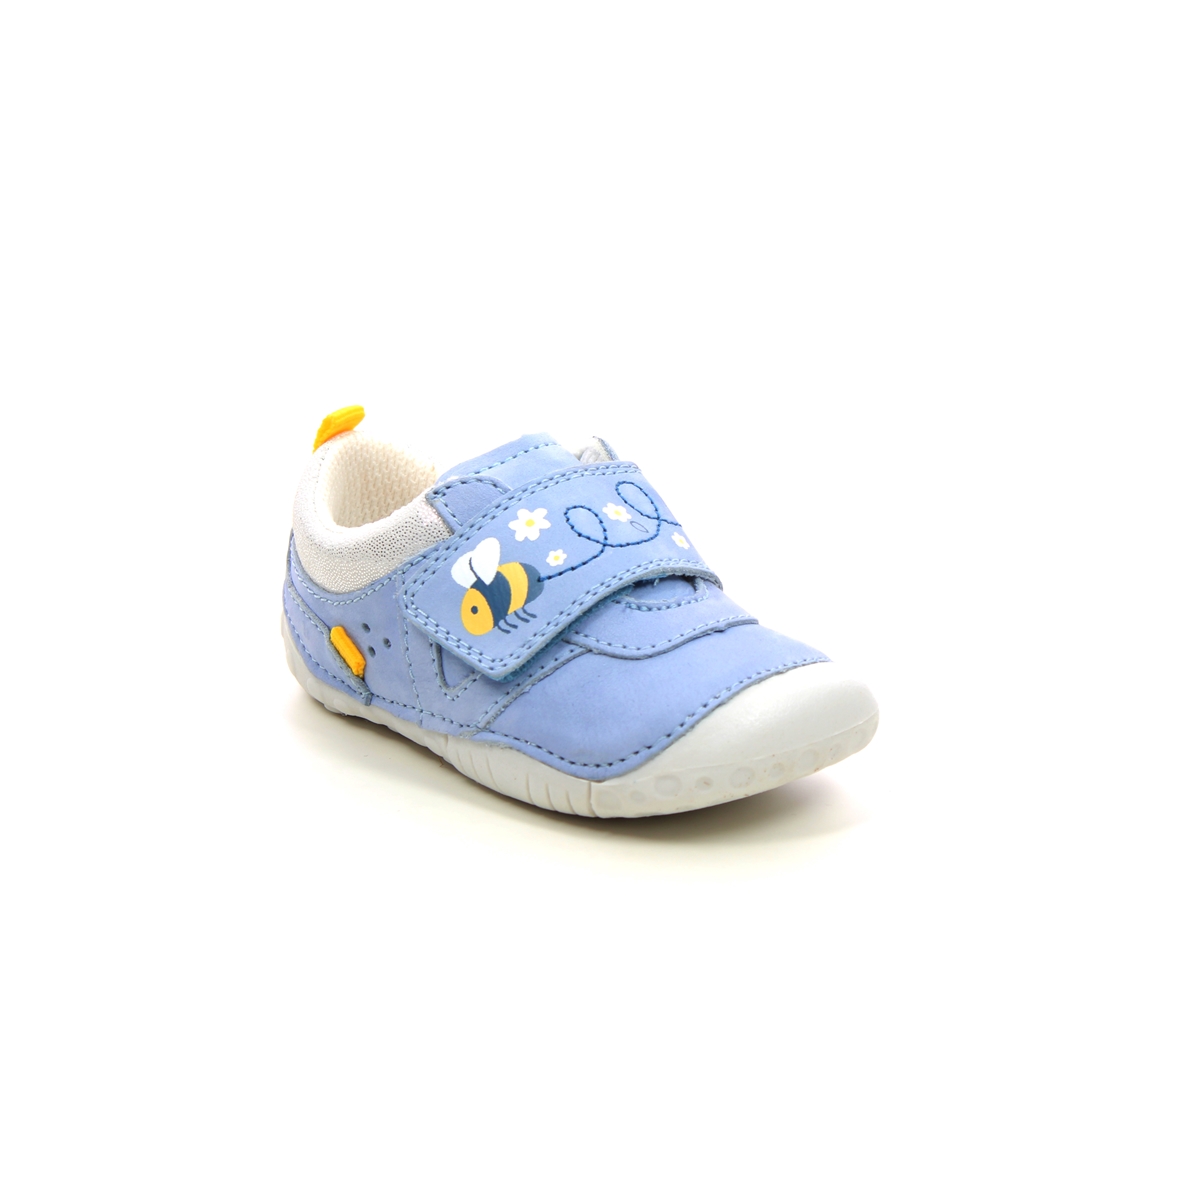 Start Rite Little Mate 1v Pale blue Kids girls first and baby shoes 0819-26F in a Plain Leather in Size 4